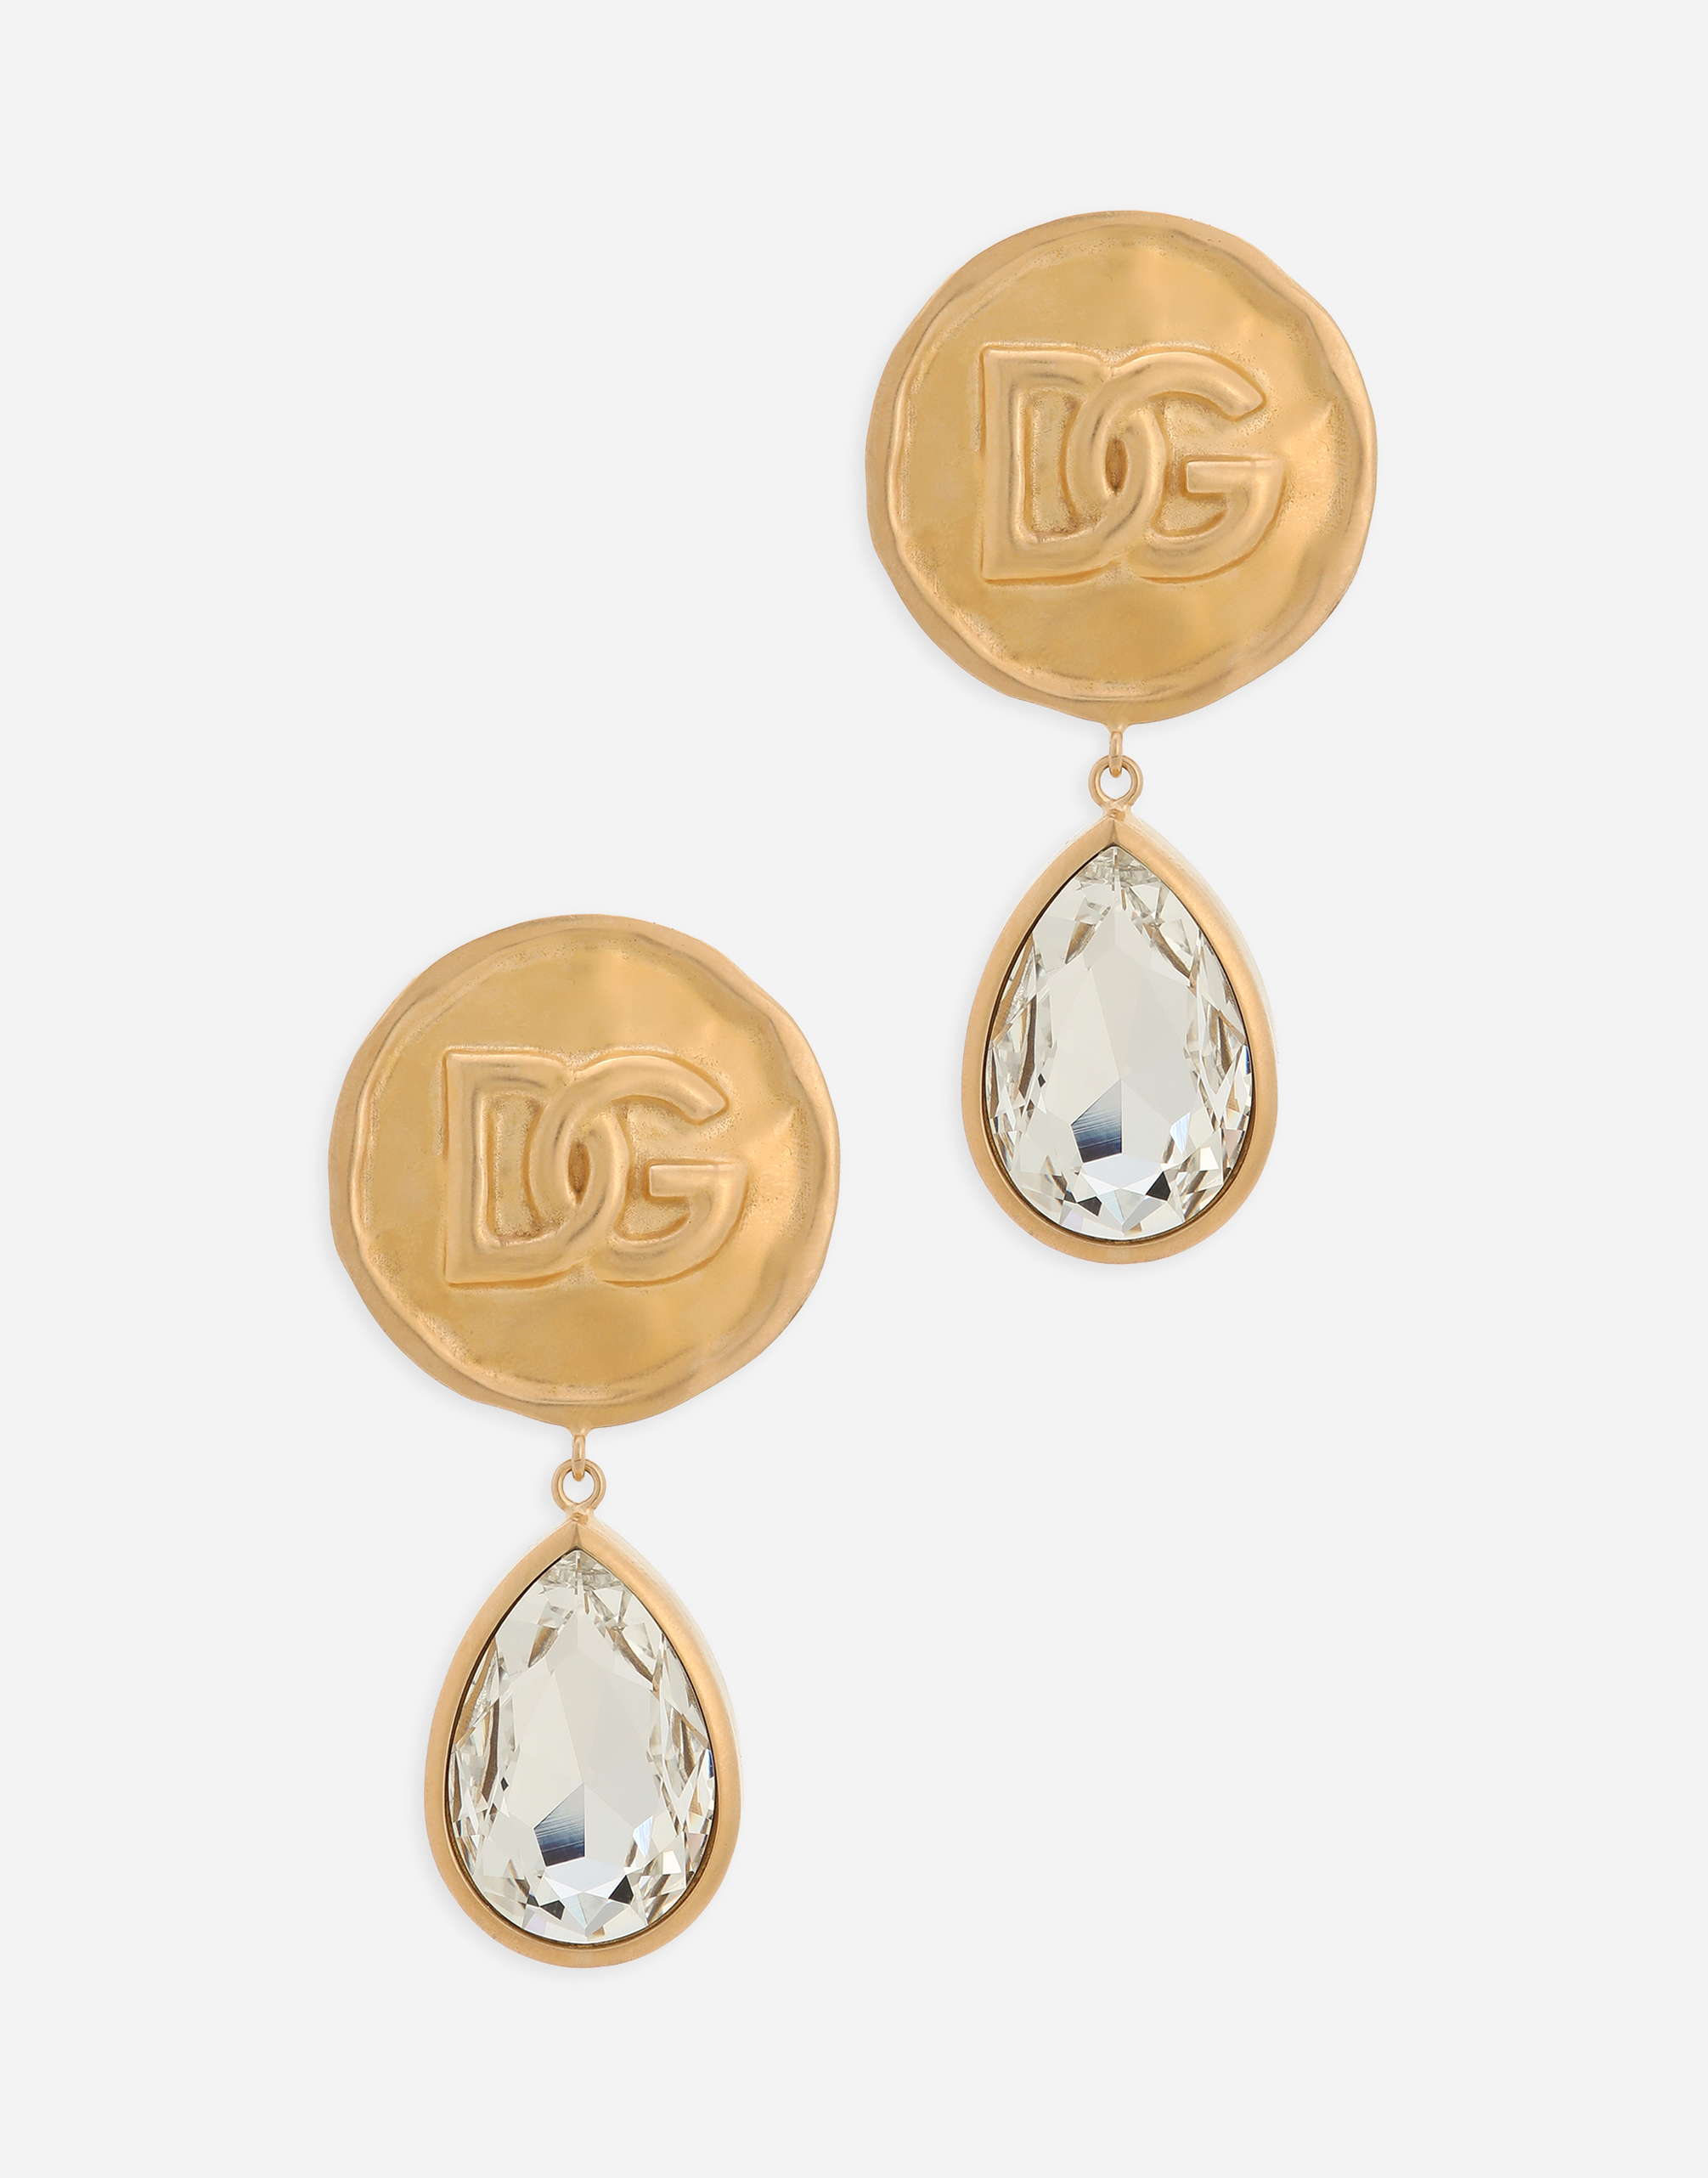 Earrings with logo coin and rhinestone pendants in Gold